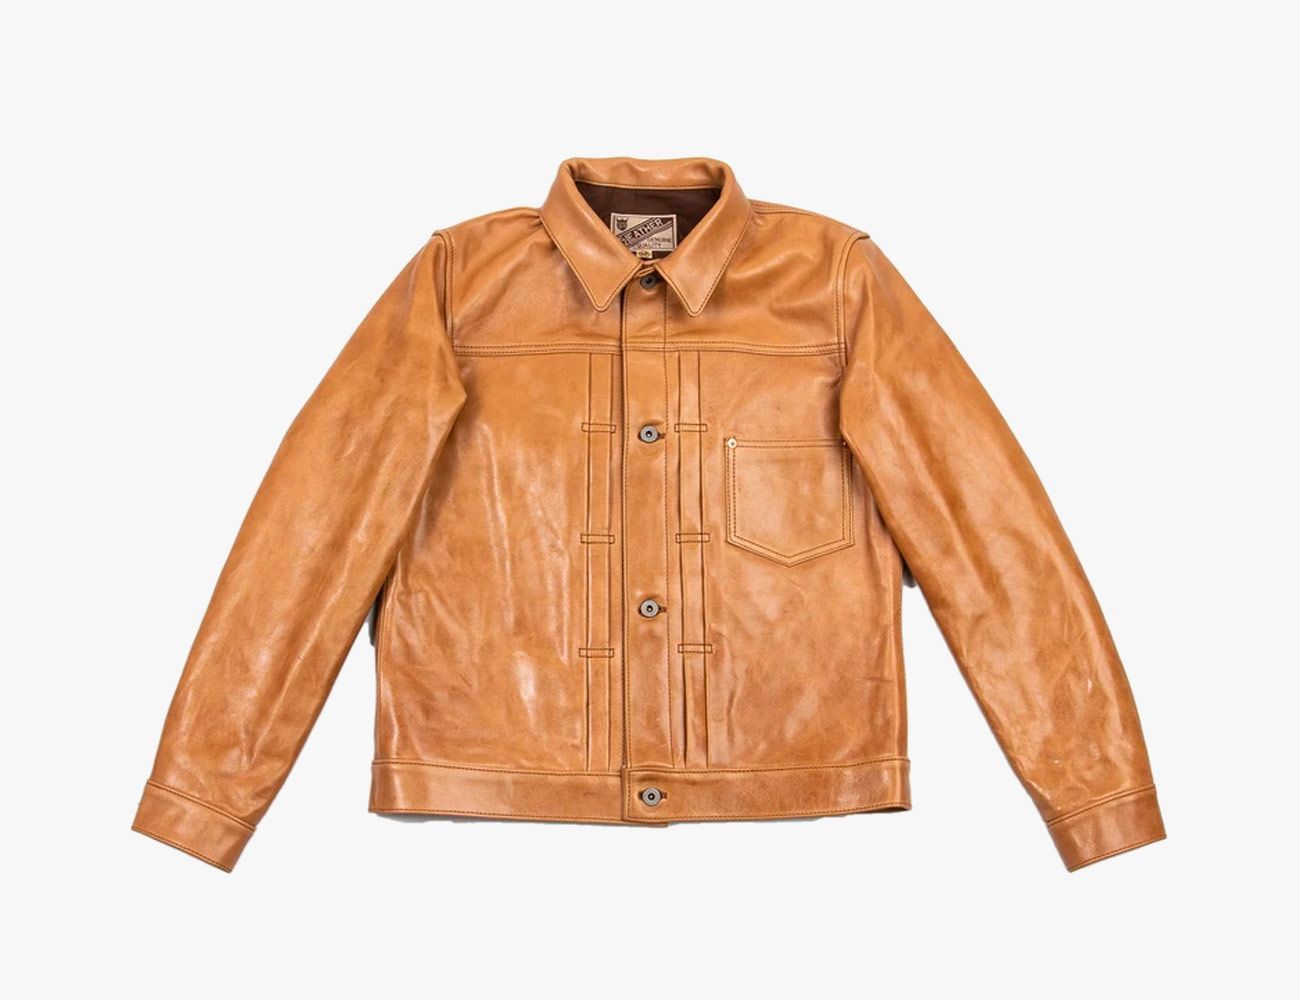 We Found The 23 Best Leather Jackets For Every Budget